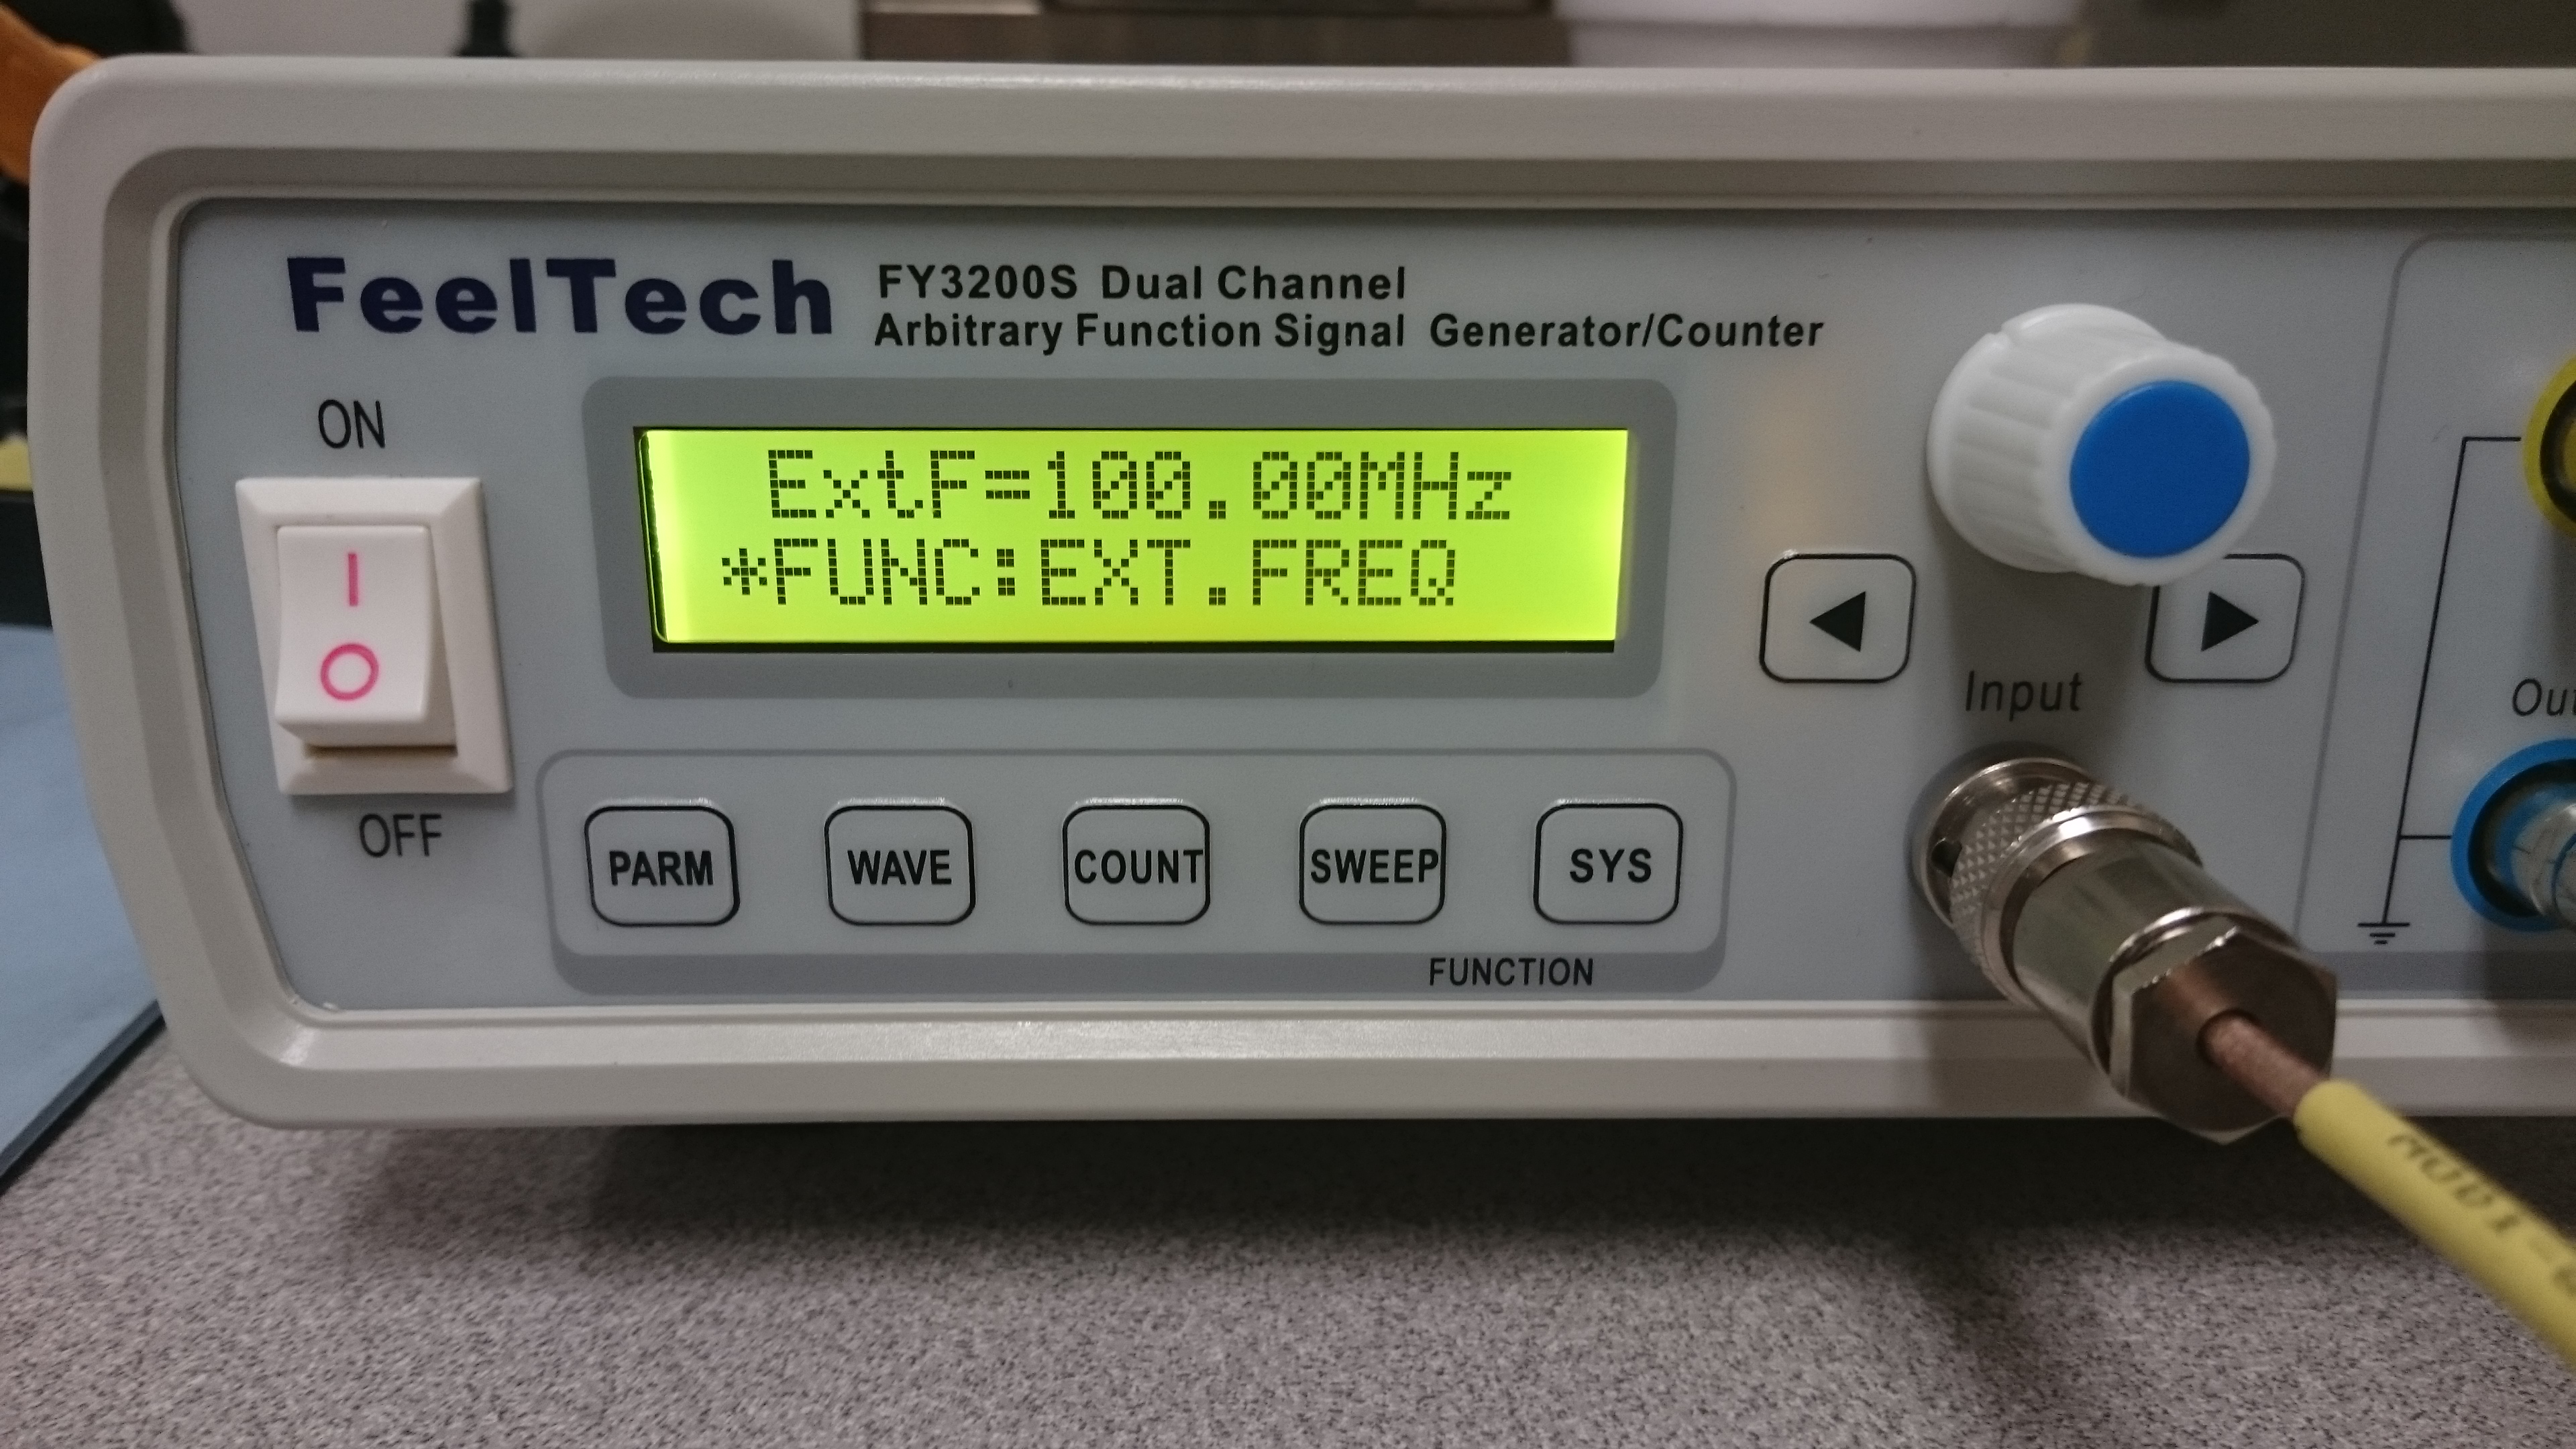 FY3200S 24MHz Dual-channel Arbitrary Waveform DDS Function Signal Generator paUK 